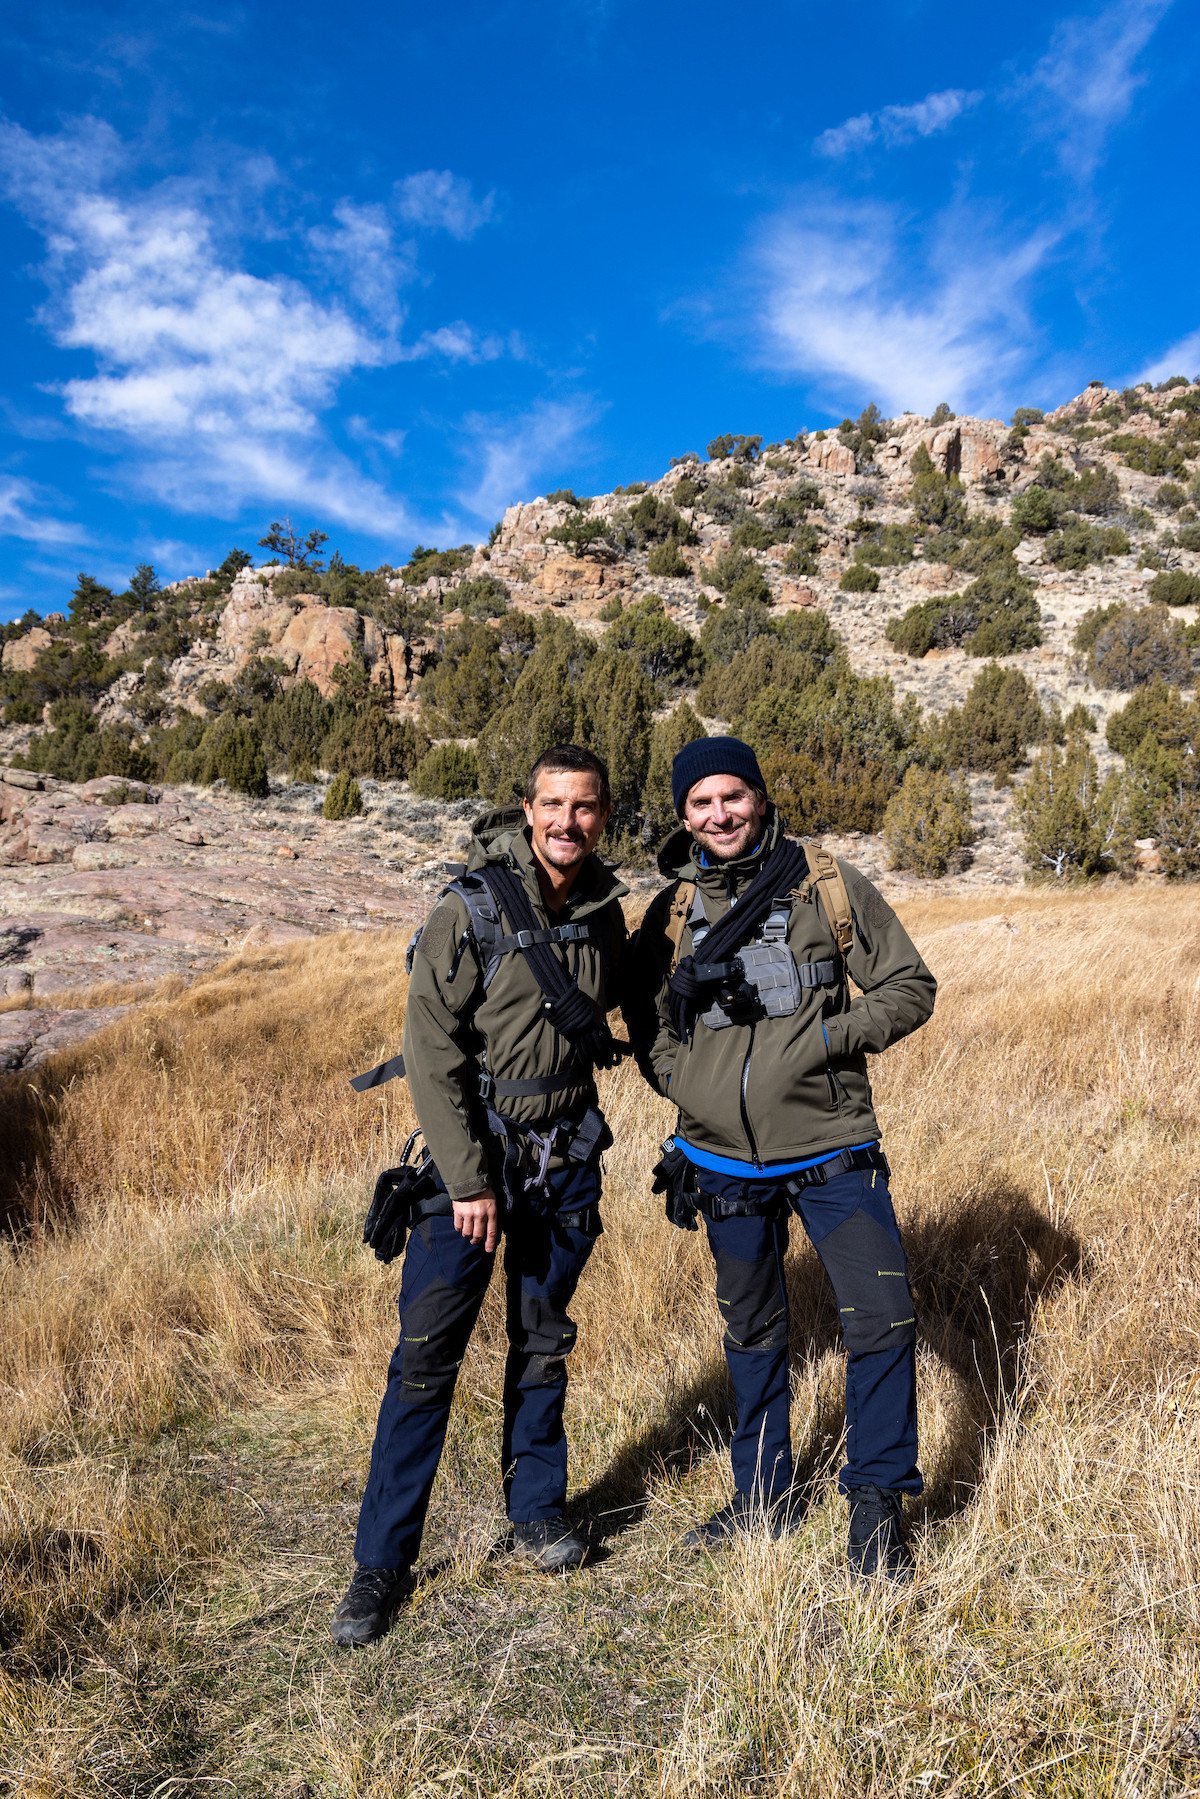 Running Wild The Challenge S2, Ep1 Recap: Bradley Cooper in the Canyons of Wyoming